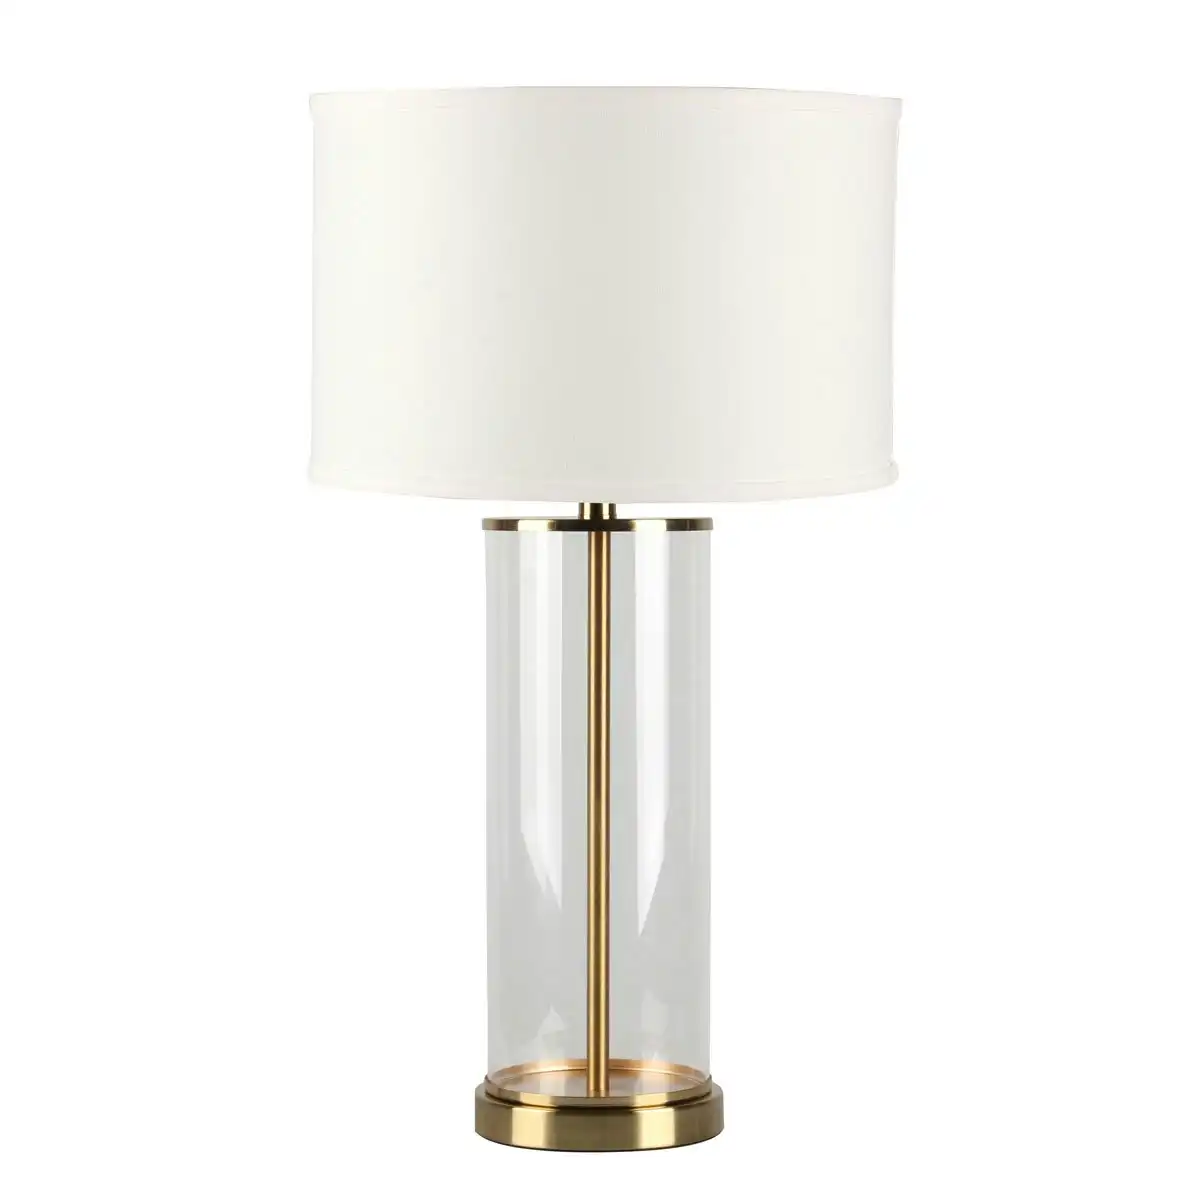 Cafe Lighting Left Bank Table Lamp - Brass with White Shade